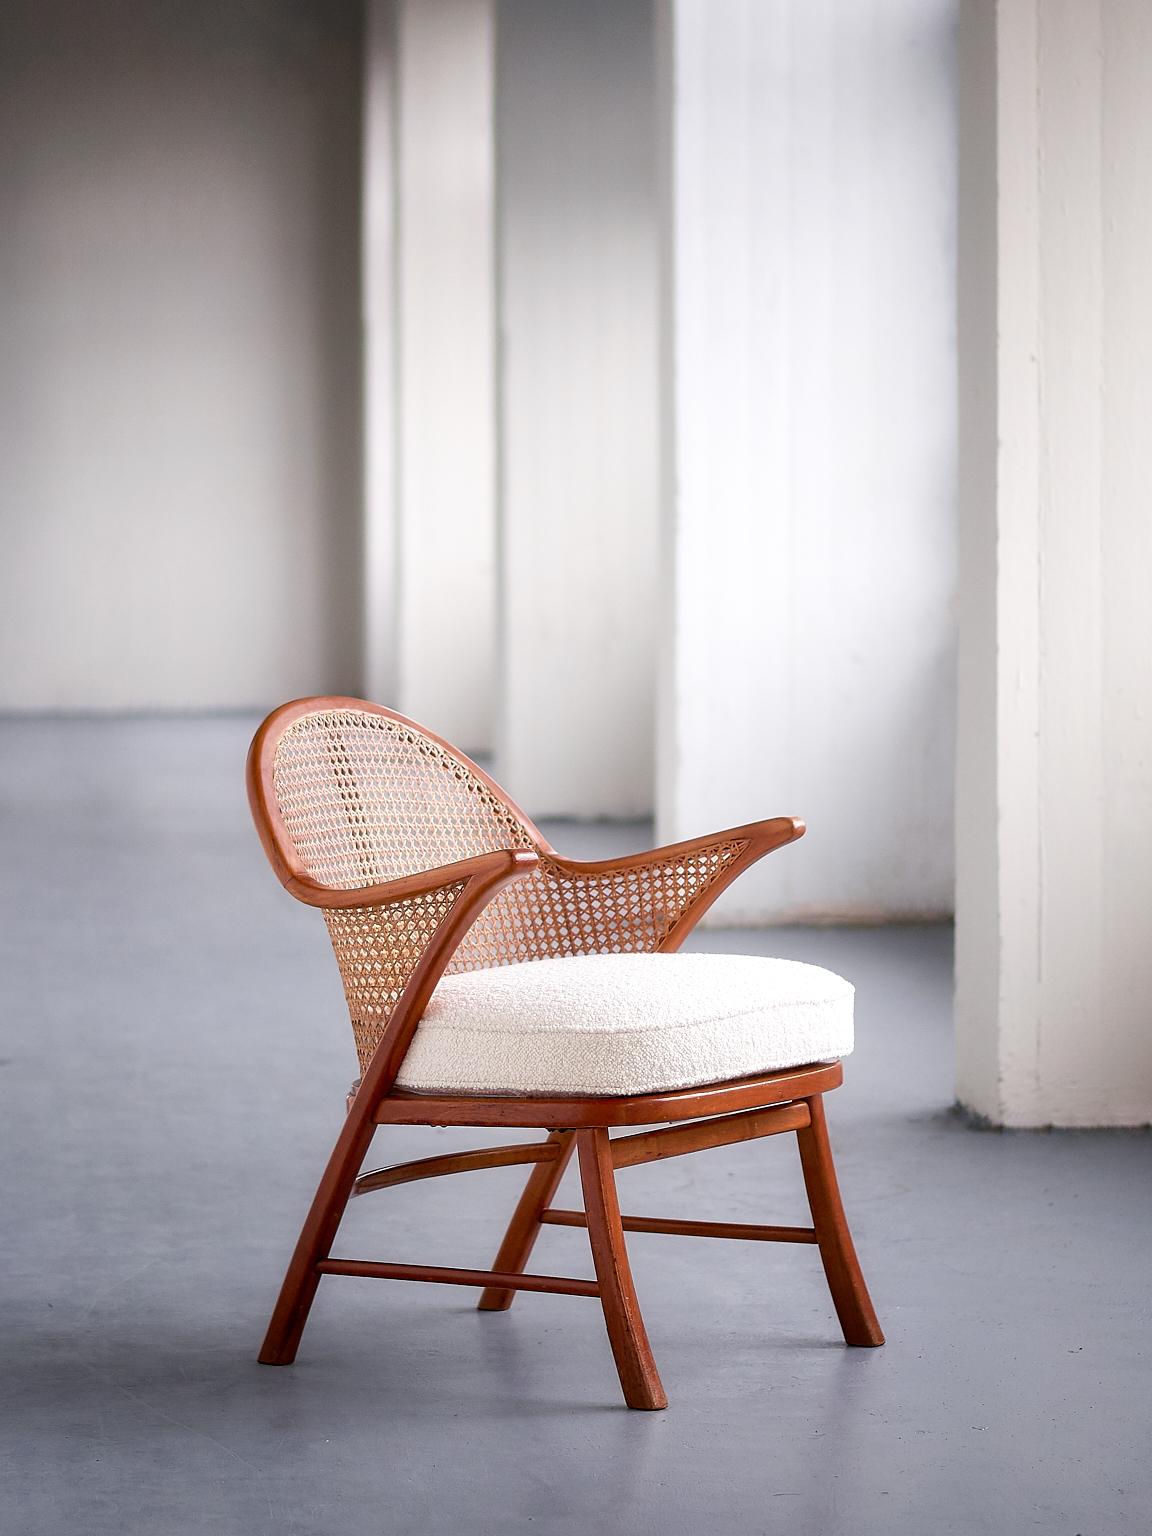 This elegant armchair was produced in Denmark in the late 1950s. The striking solid beech frame is marked by its curved legs, two slats on the sides and one rear slat. The curved backrest of the chair is executed in a French cane. The original